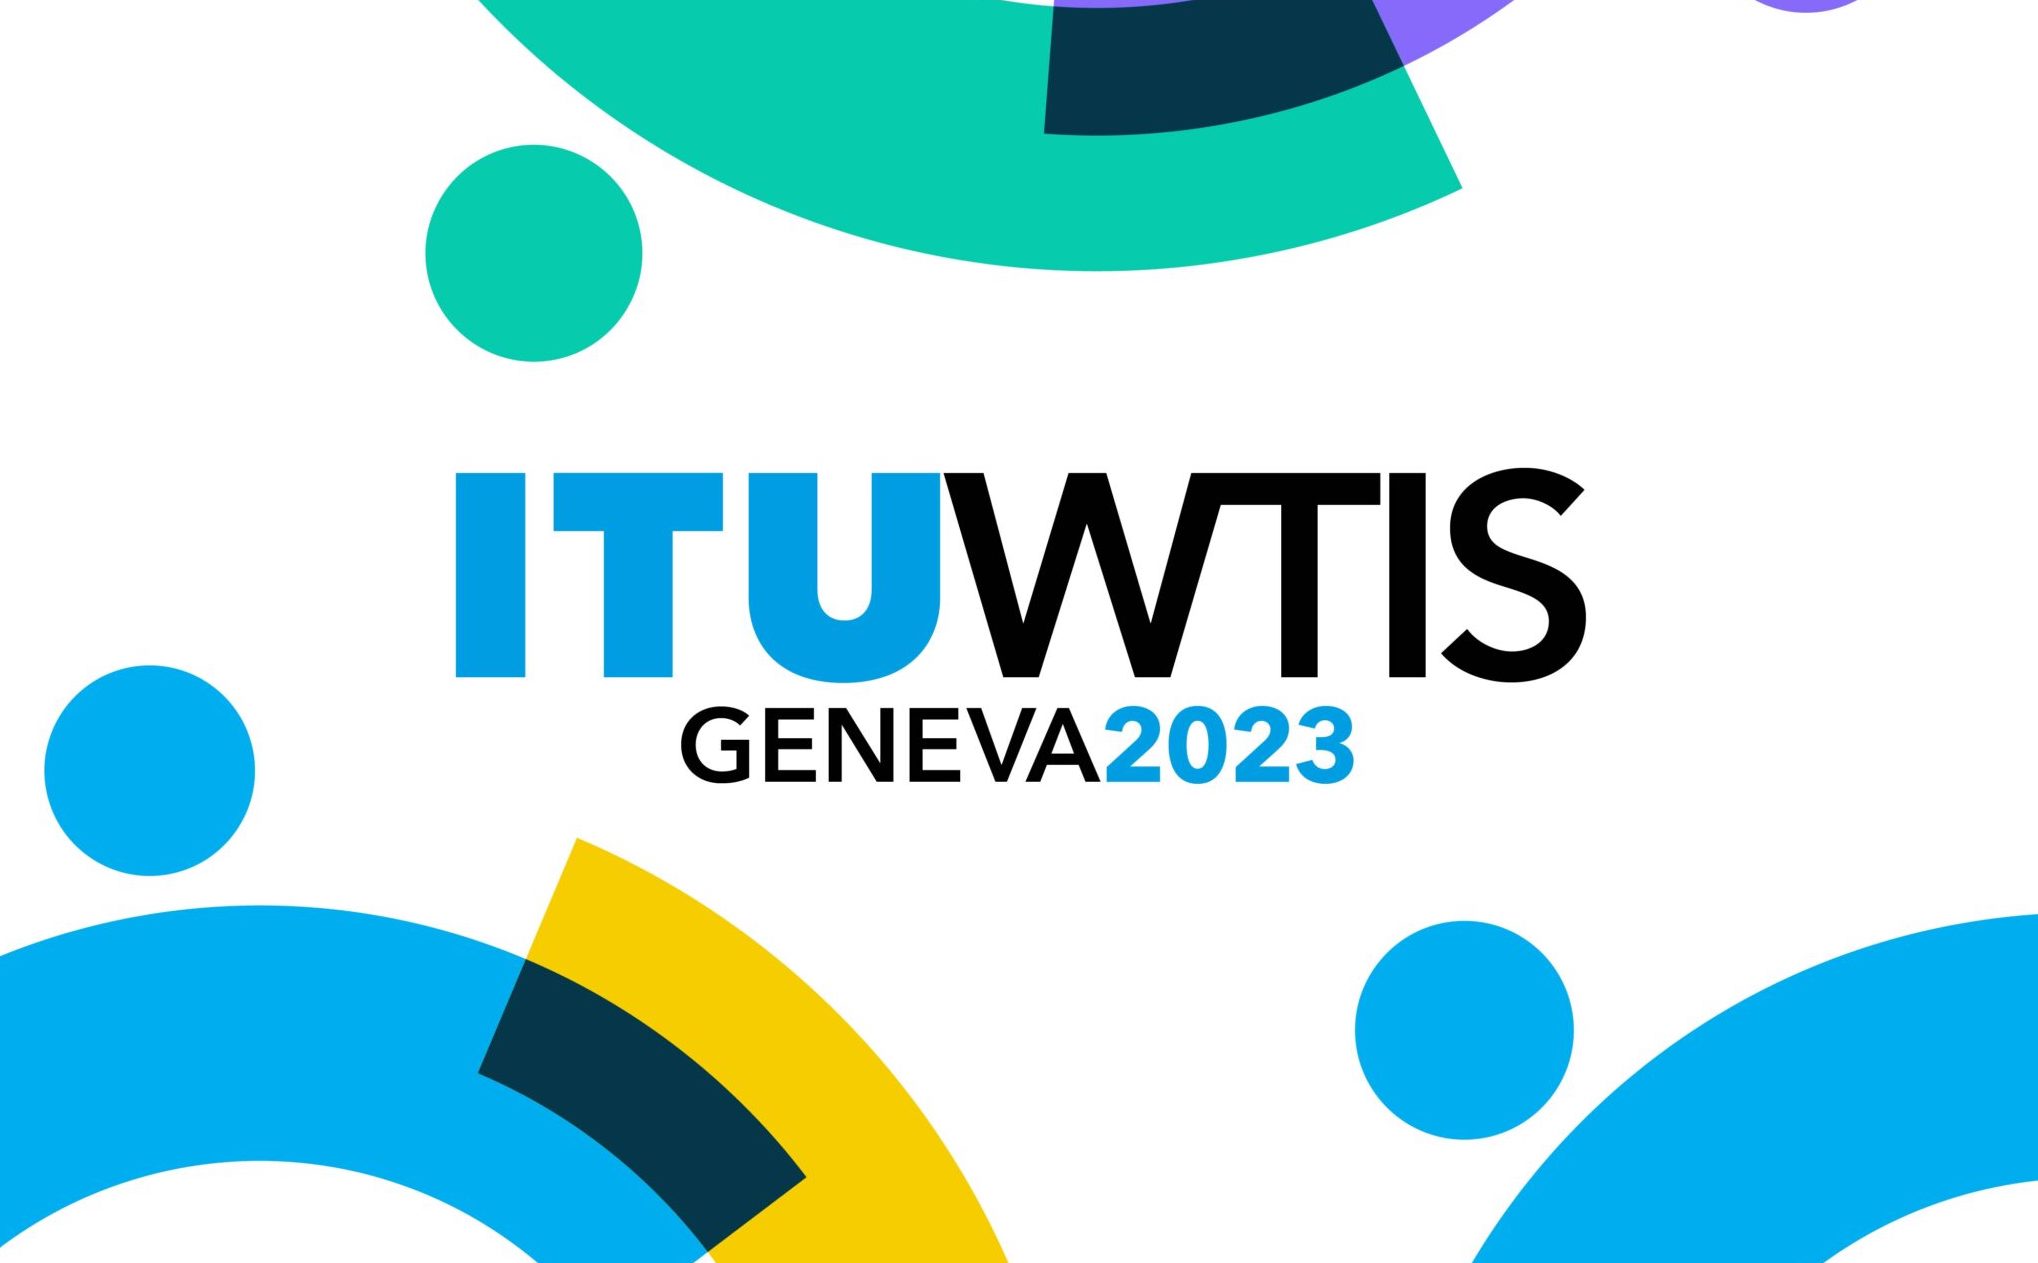 The International Telecommunication Union (ITU) develops measurement projects for ict use and internet connectivity. Main outcomes of WTIS 2023.